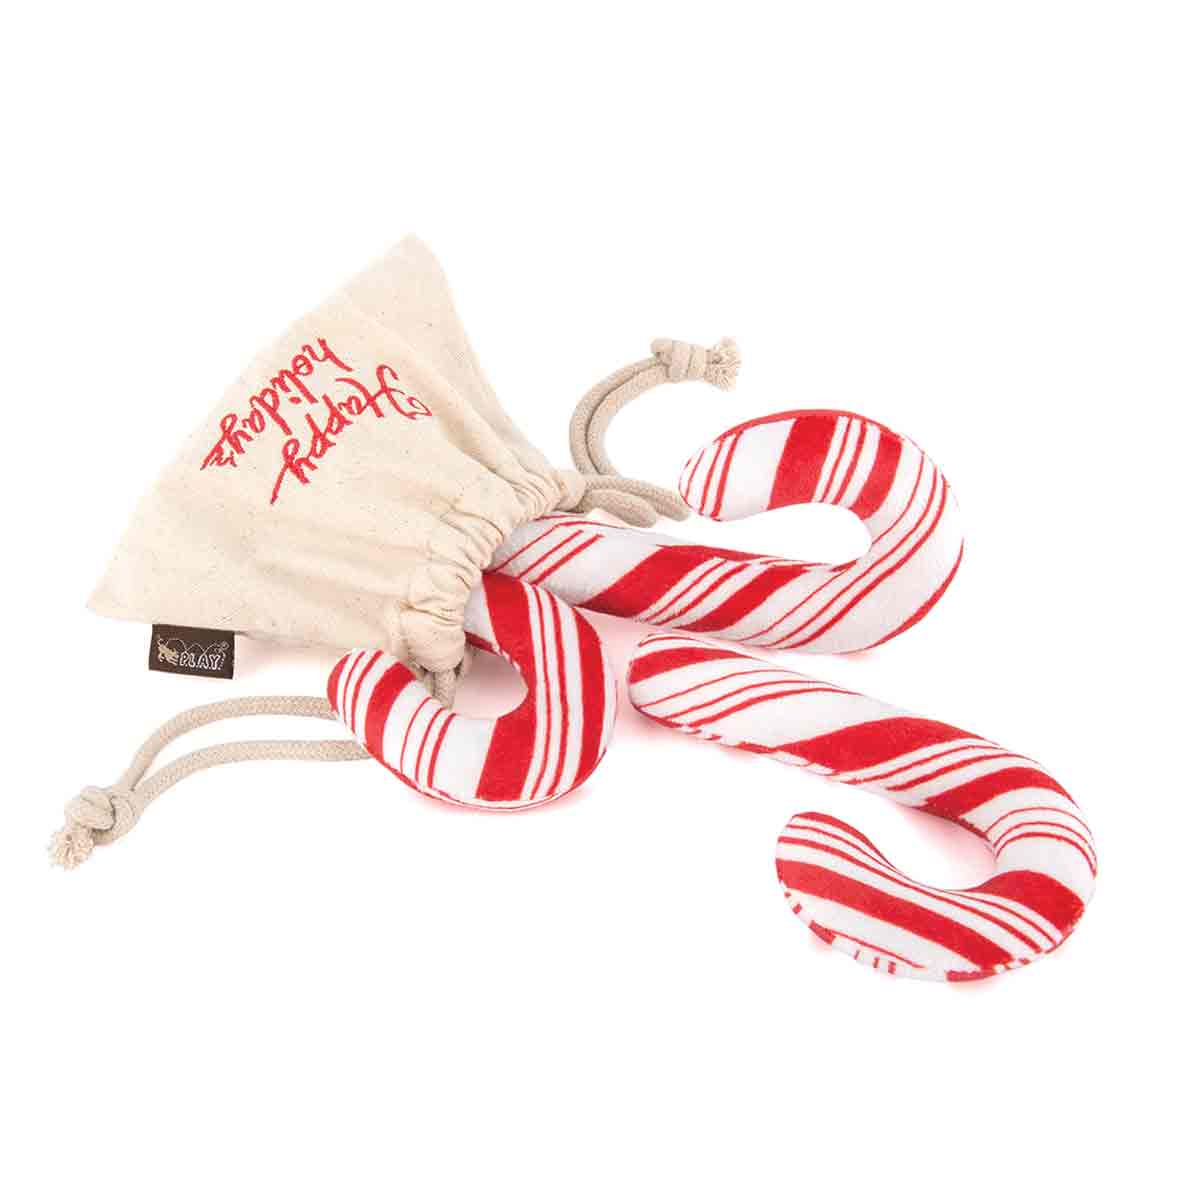 Candy Canes Christmas - Dog Toy - The Happy Jack Co